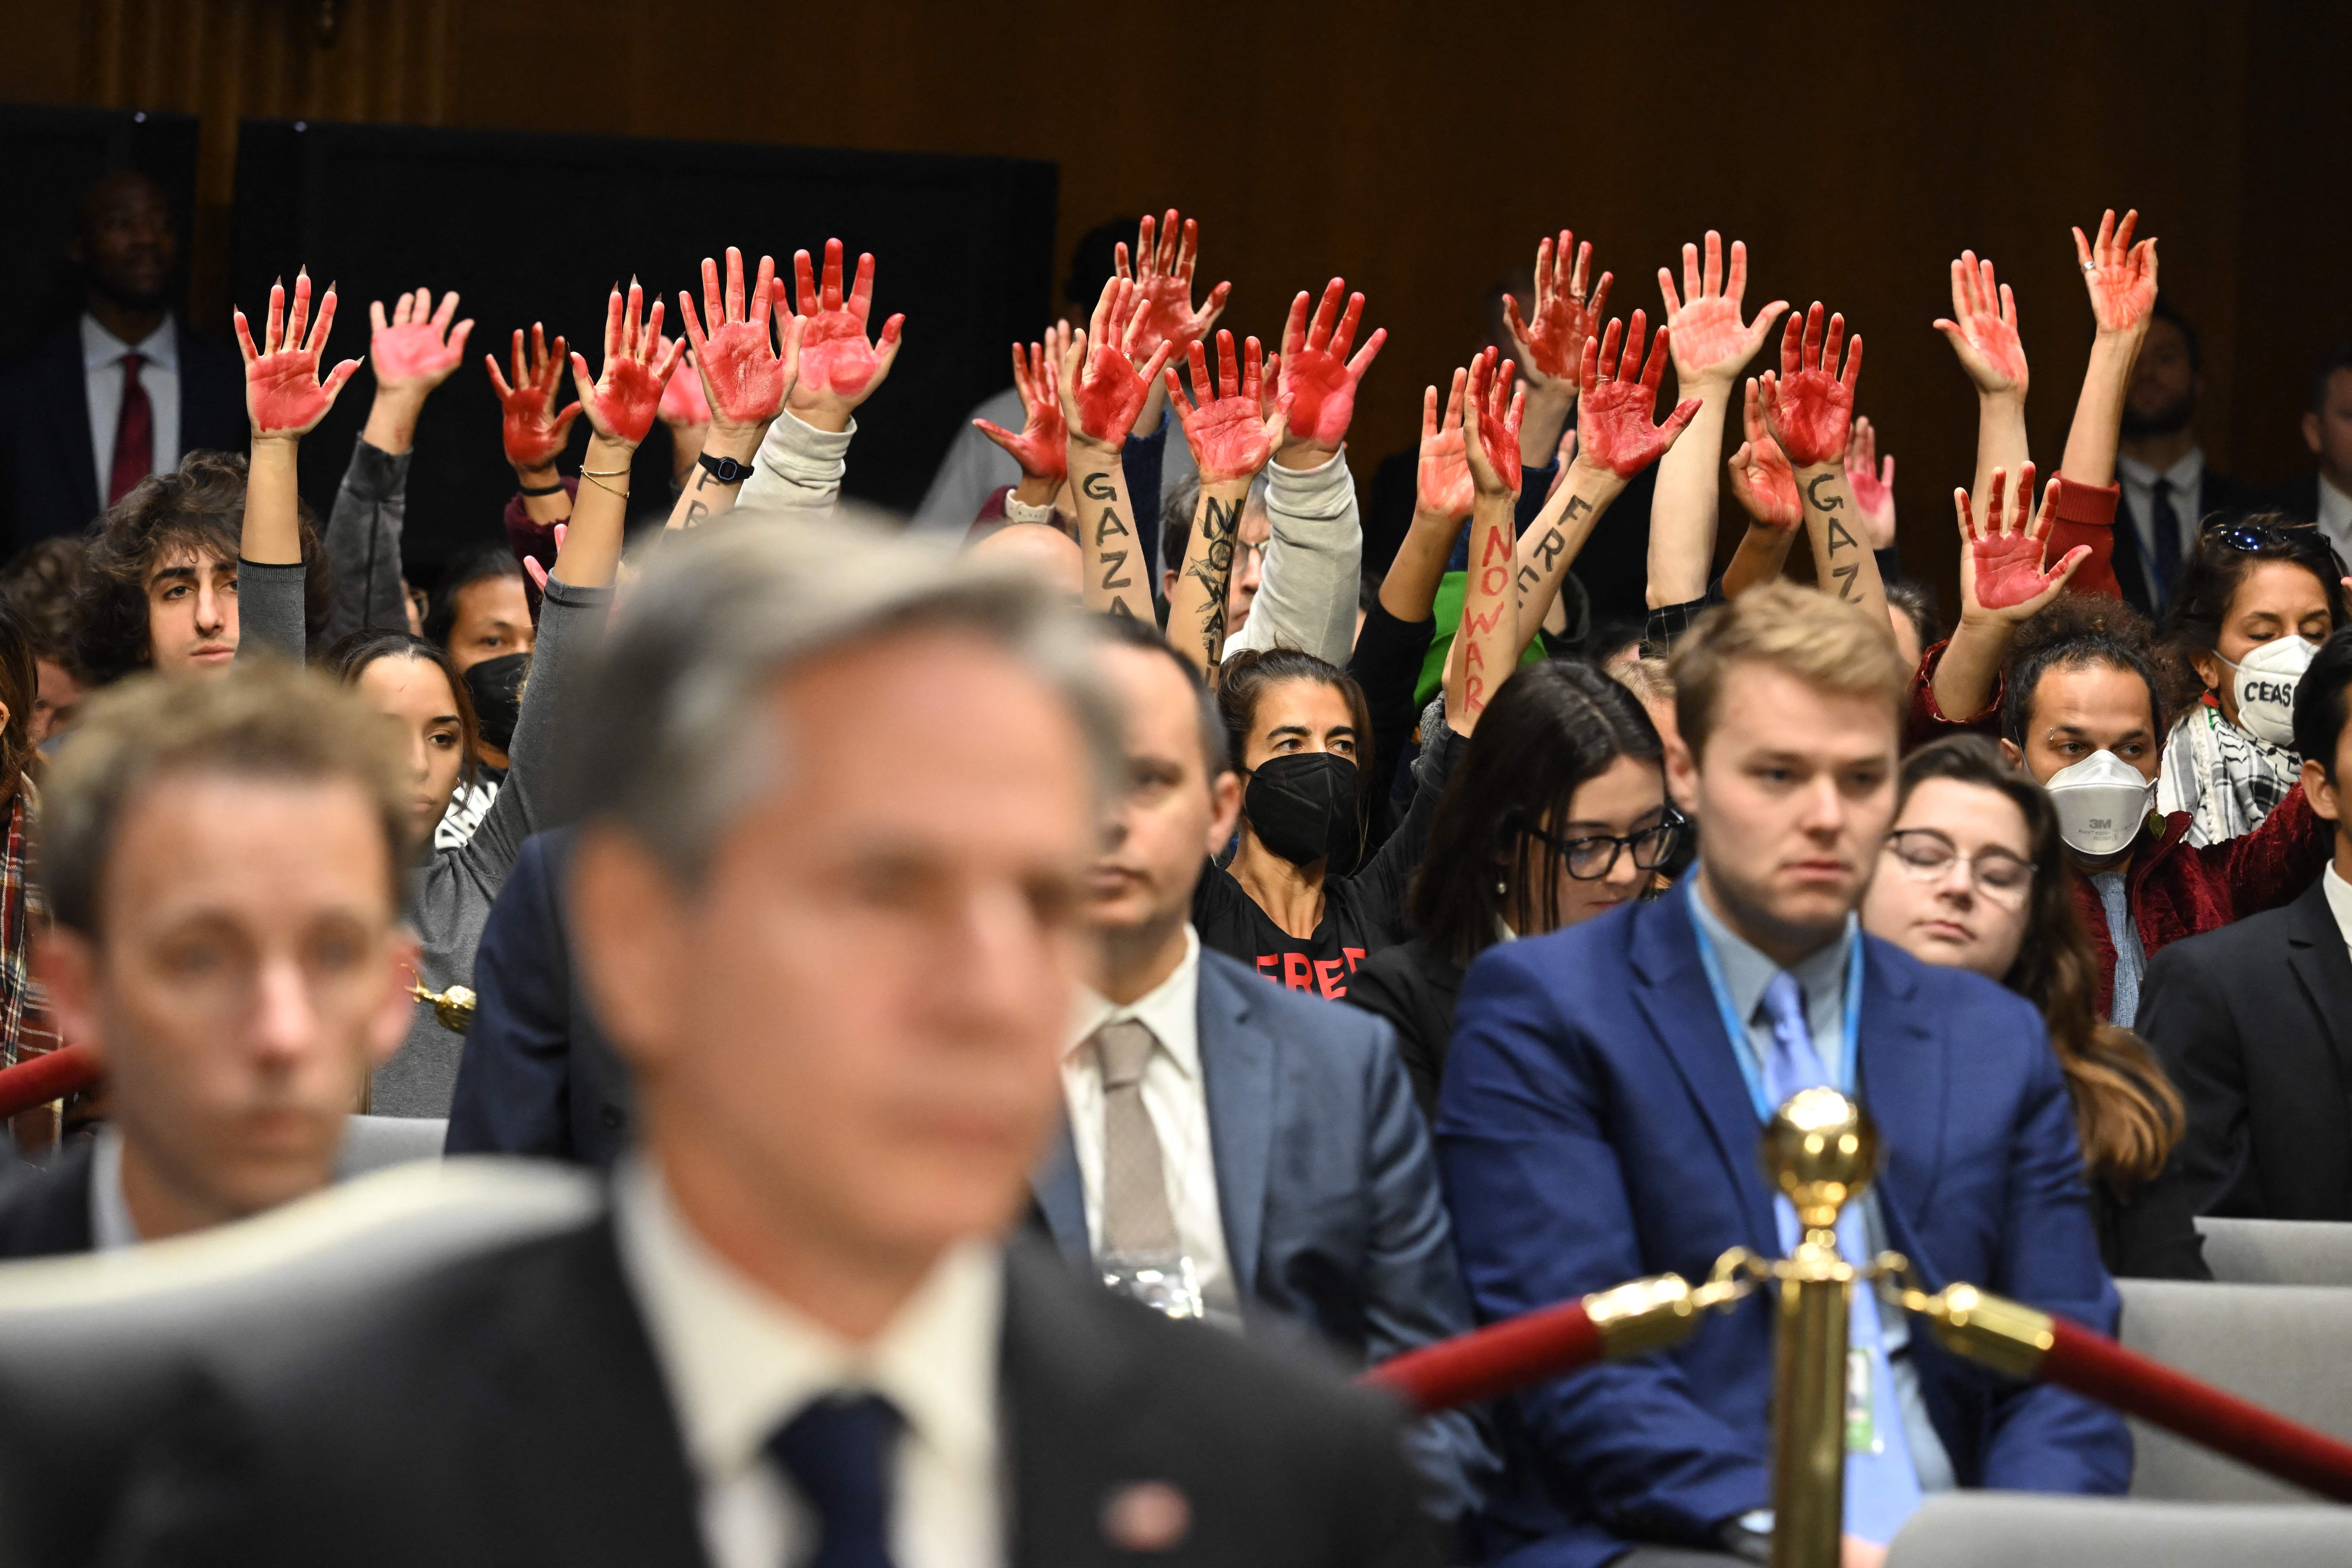 A photo showing U.S. Secretary of State Antony Blinken out of focus in the foreground with protesters in the background holding up their hands covered in red ink.